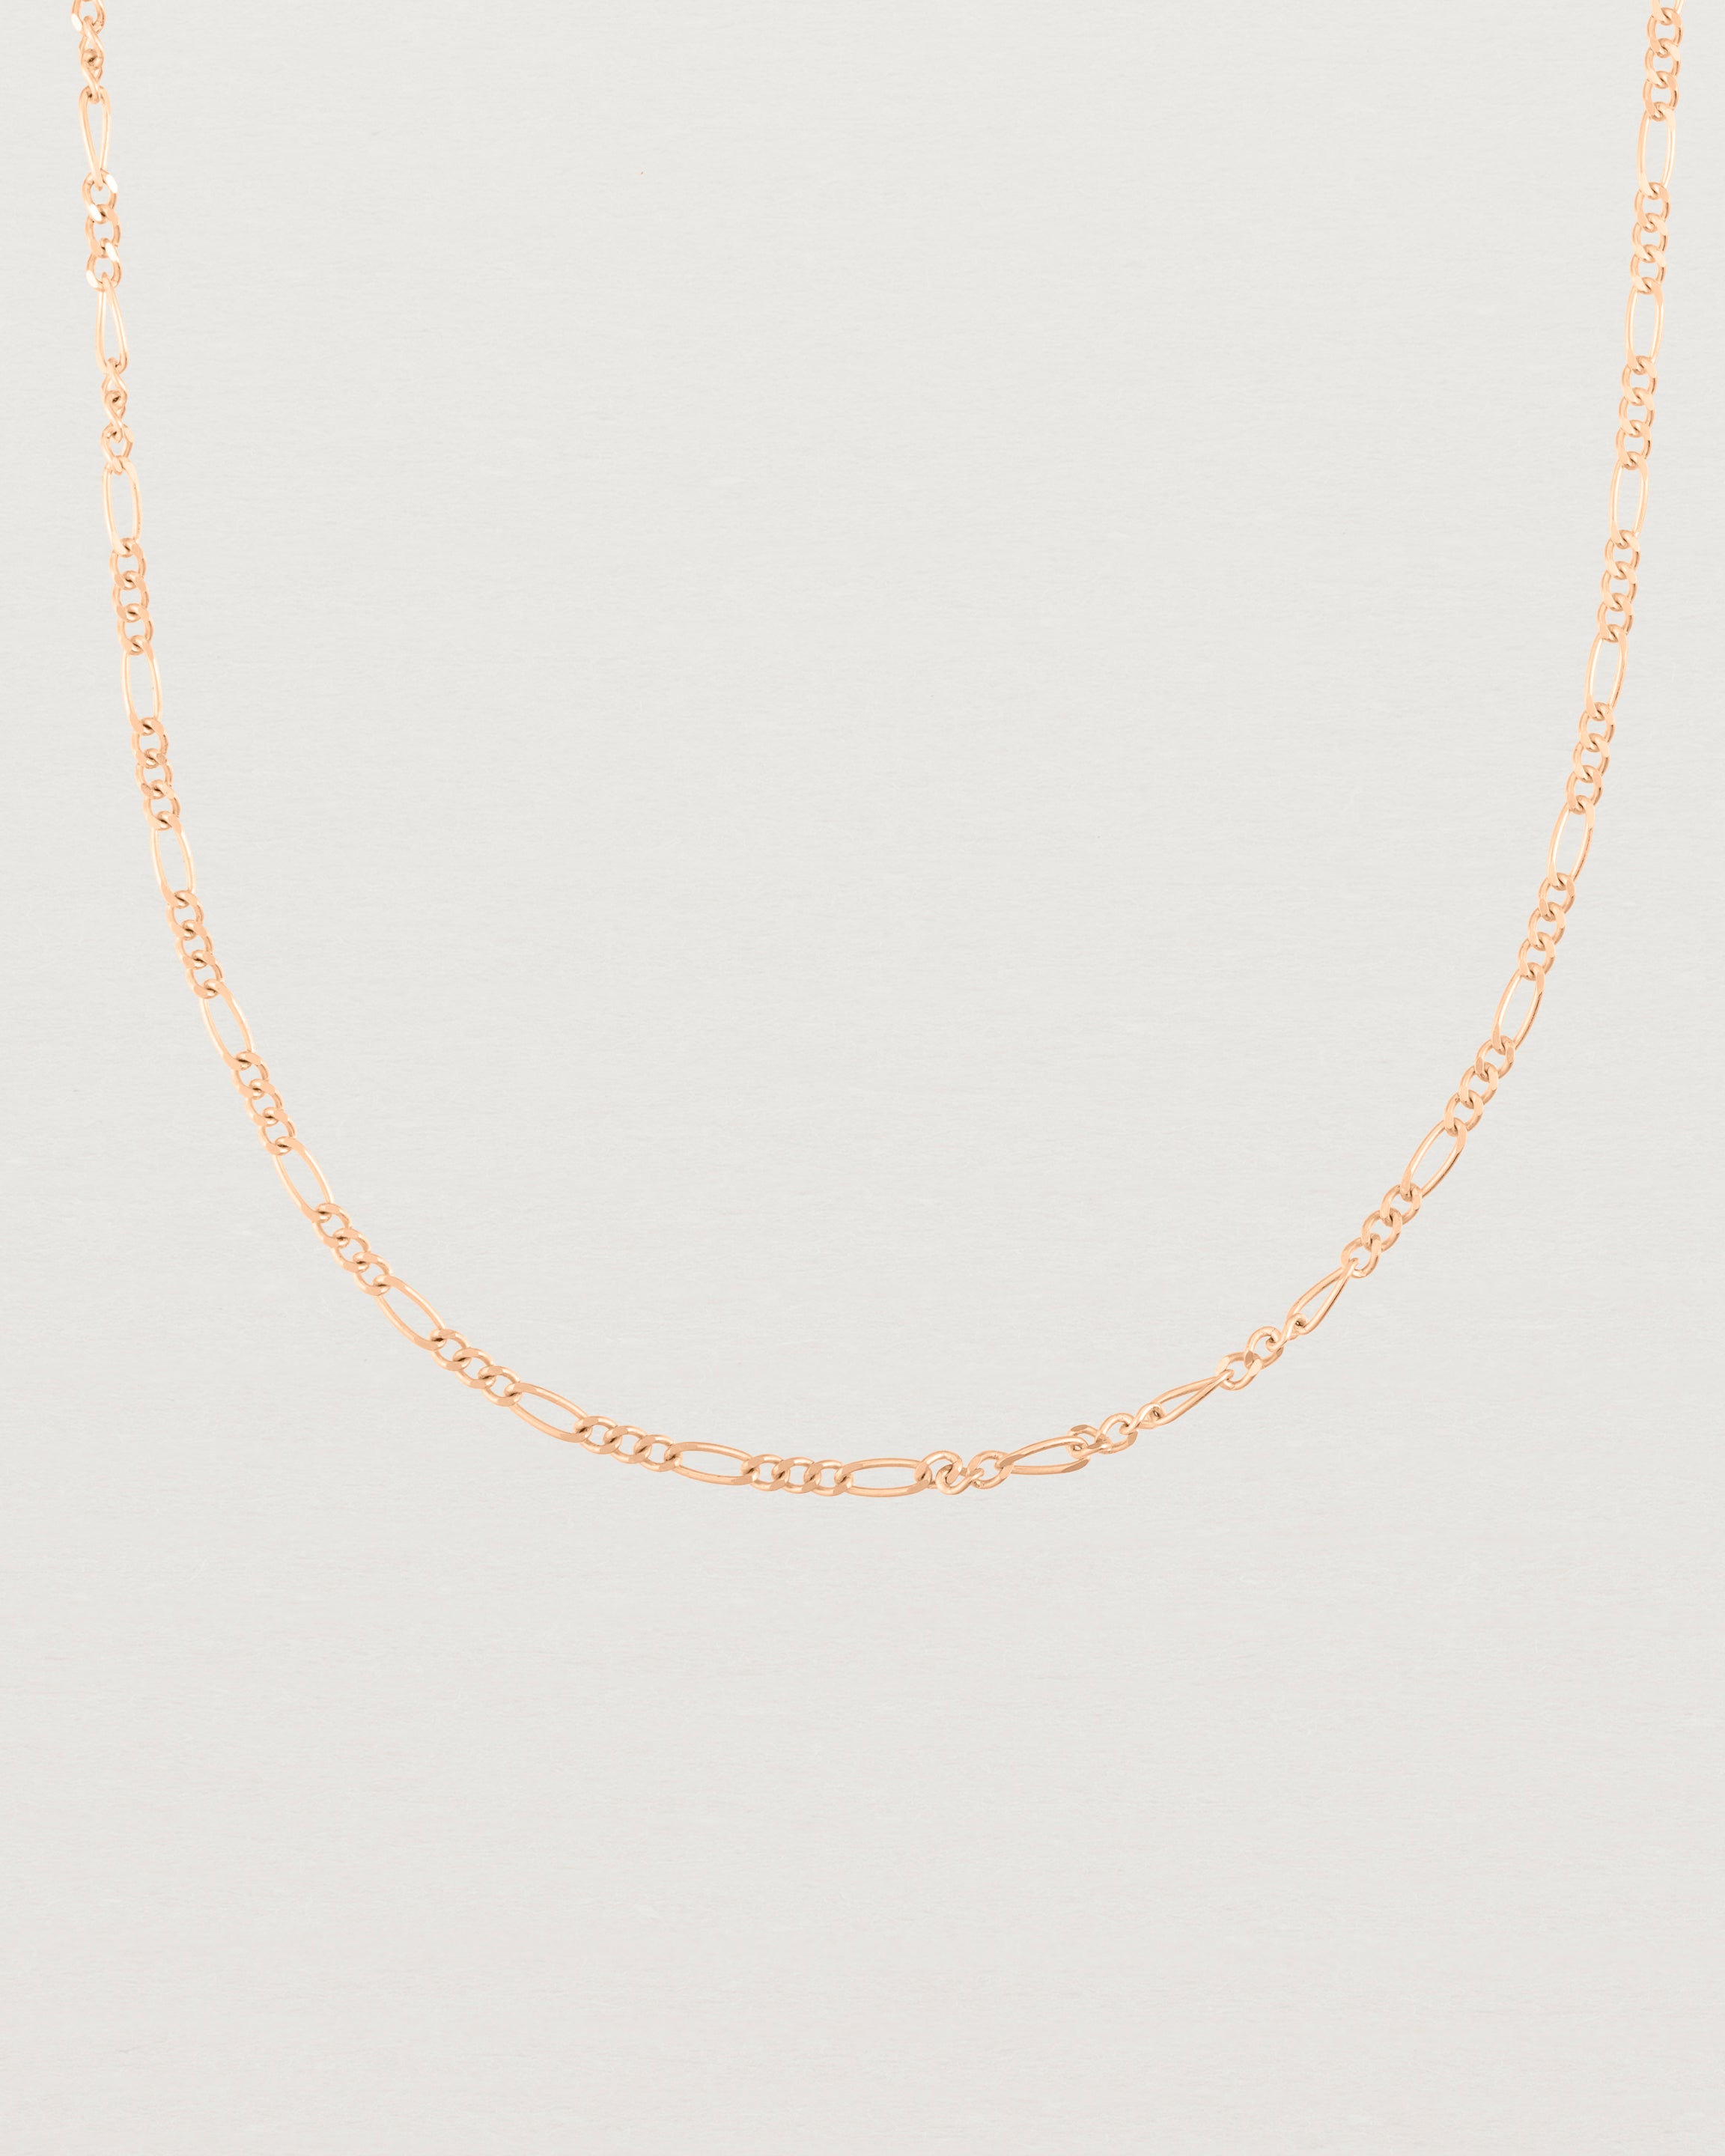 Our fine Figaro chain in rose gold